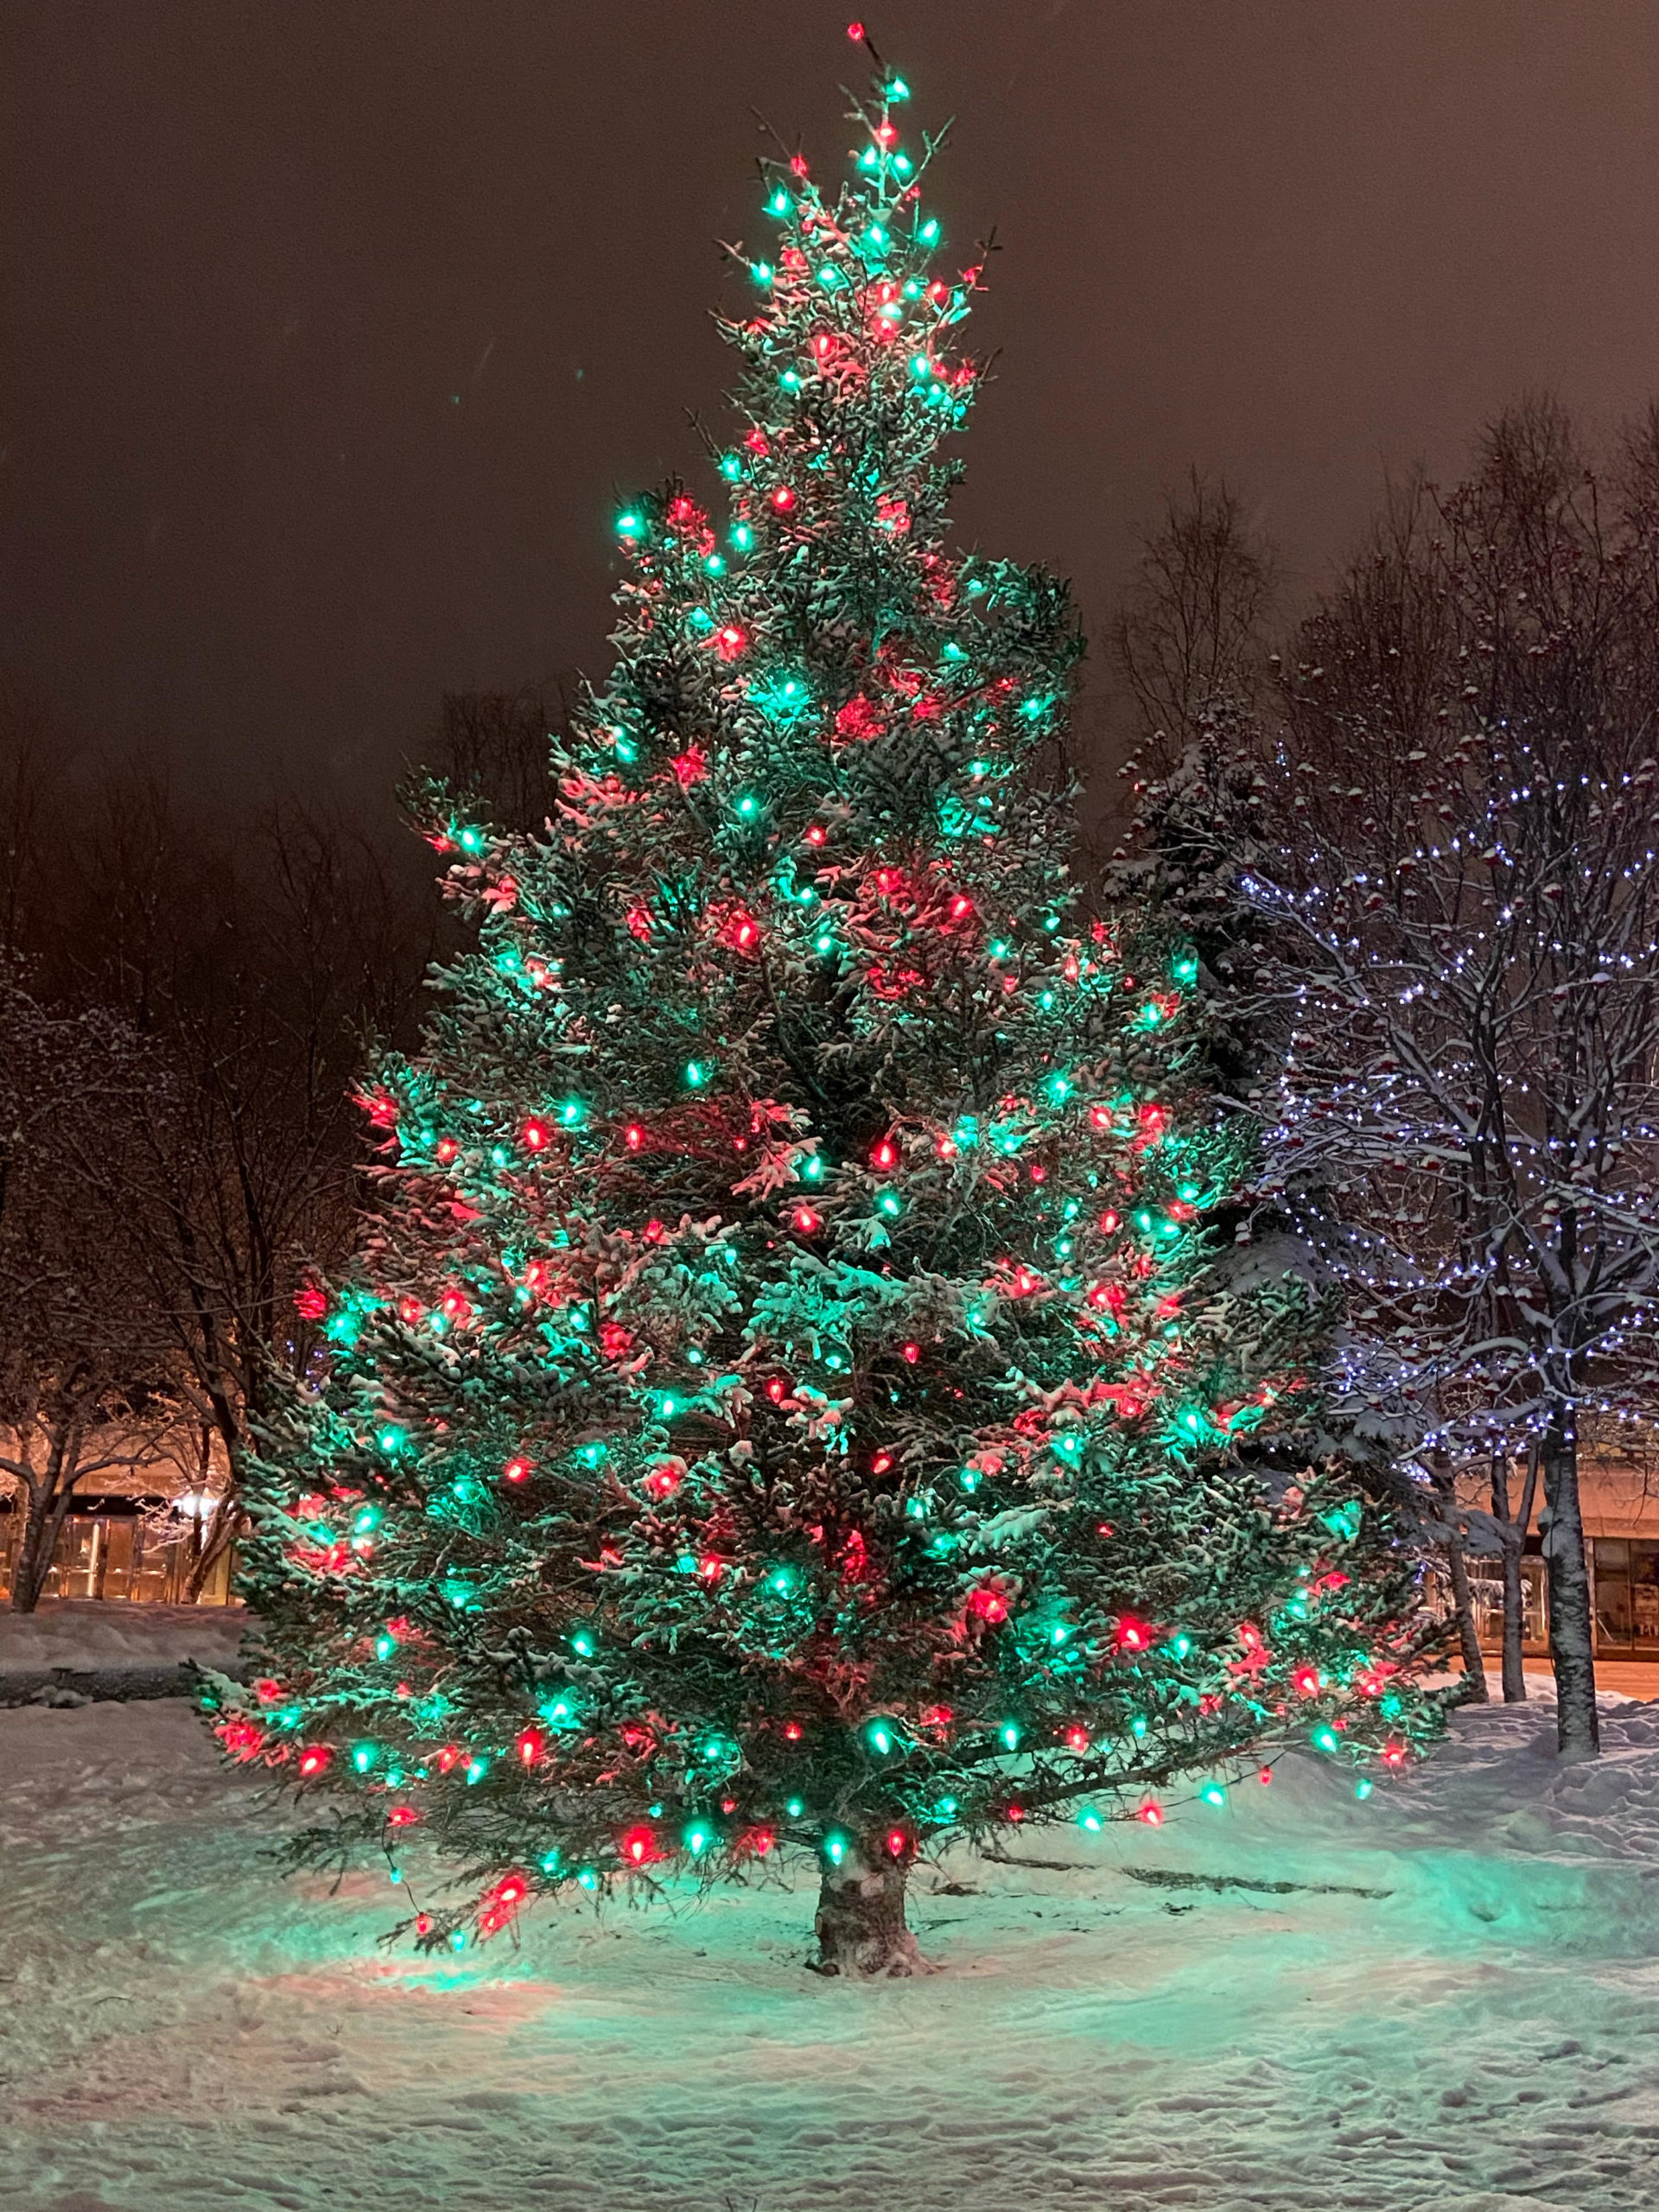 Large lighted tree in Town Square